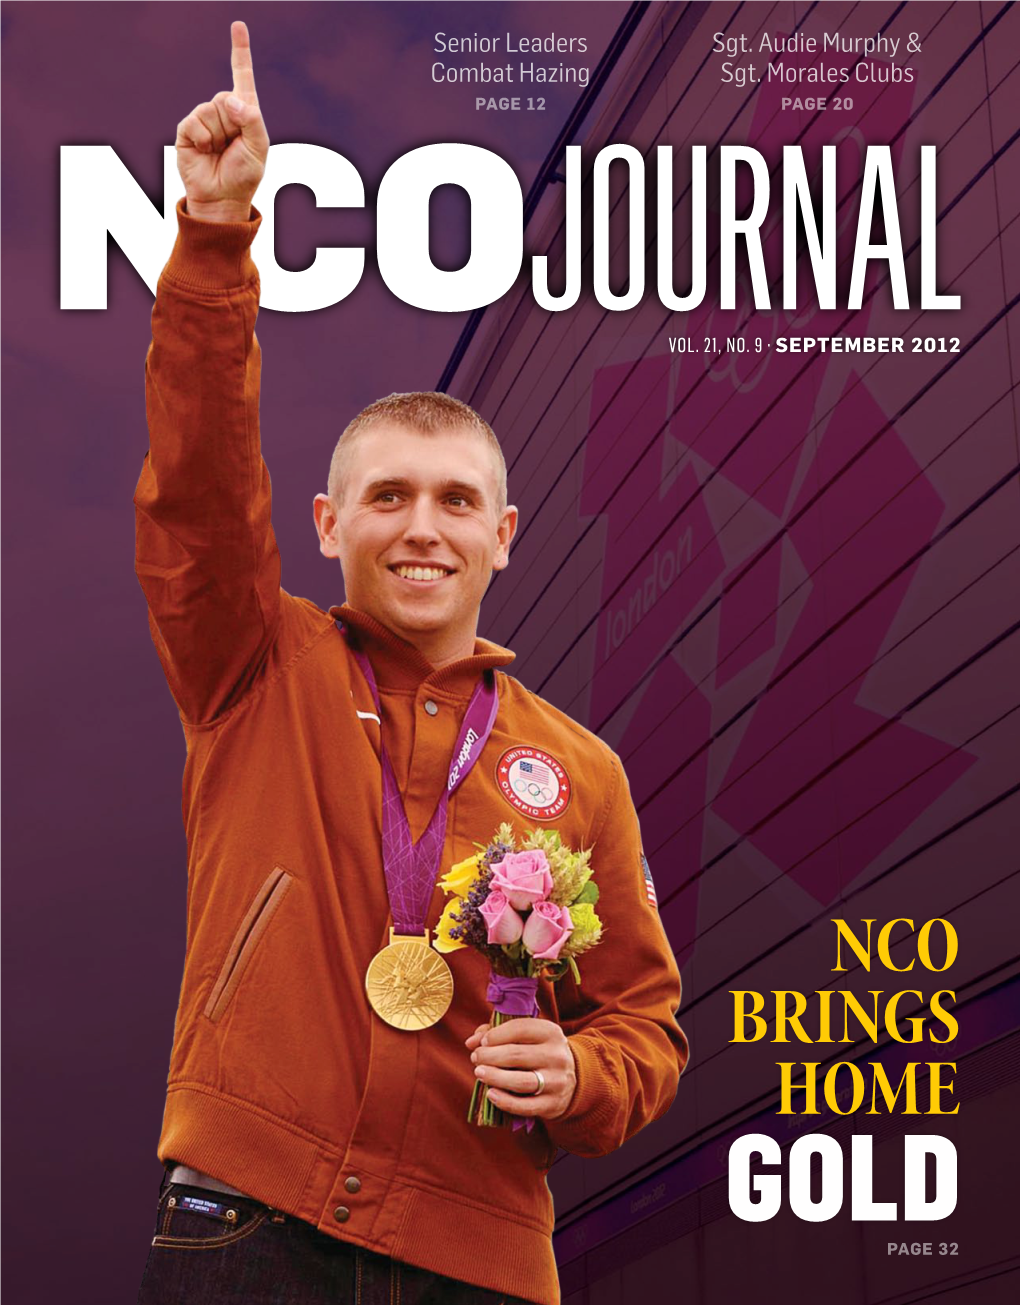 NCO BRINGS HOME GOLD PAGE 32 the Official Magazine of NCO Professional Development